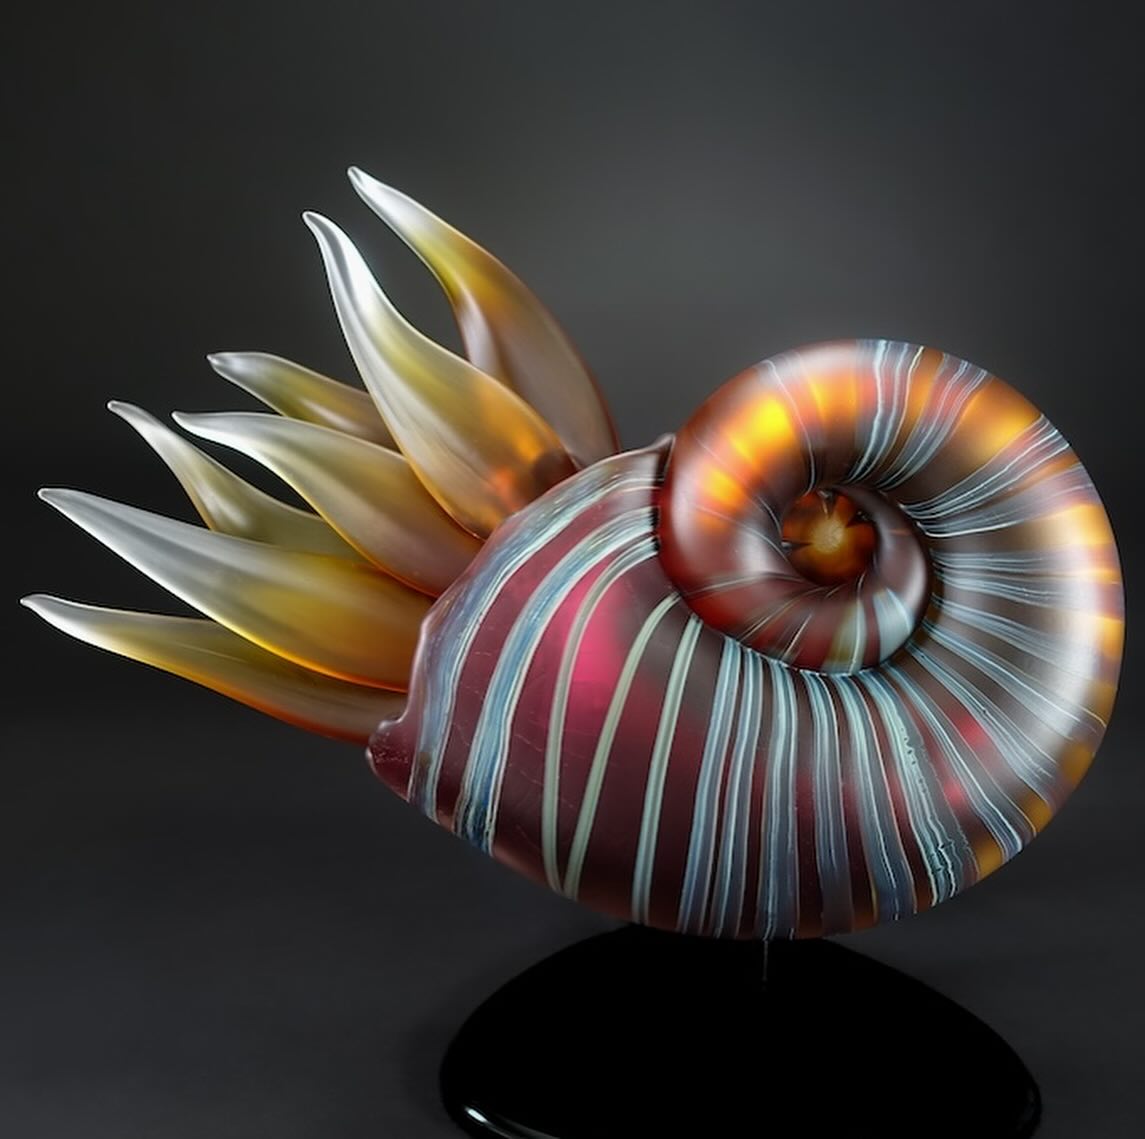 Kelly O’dell's Animal Glass Sculptures (1)